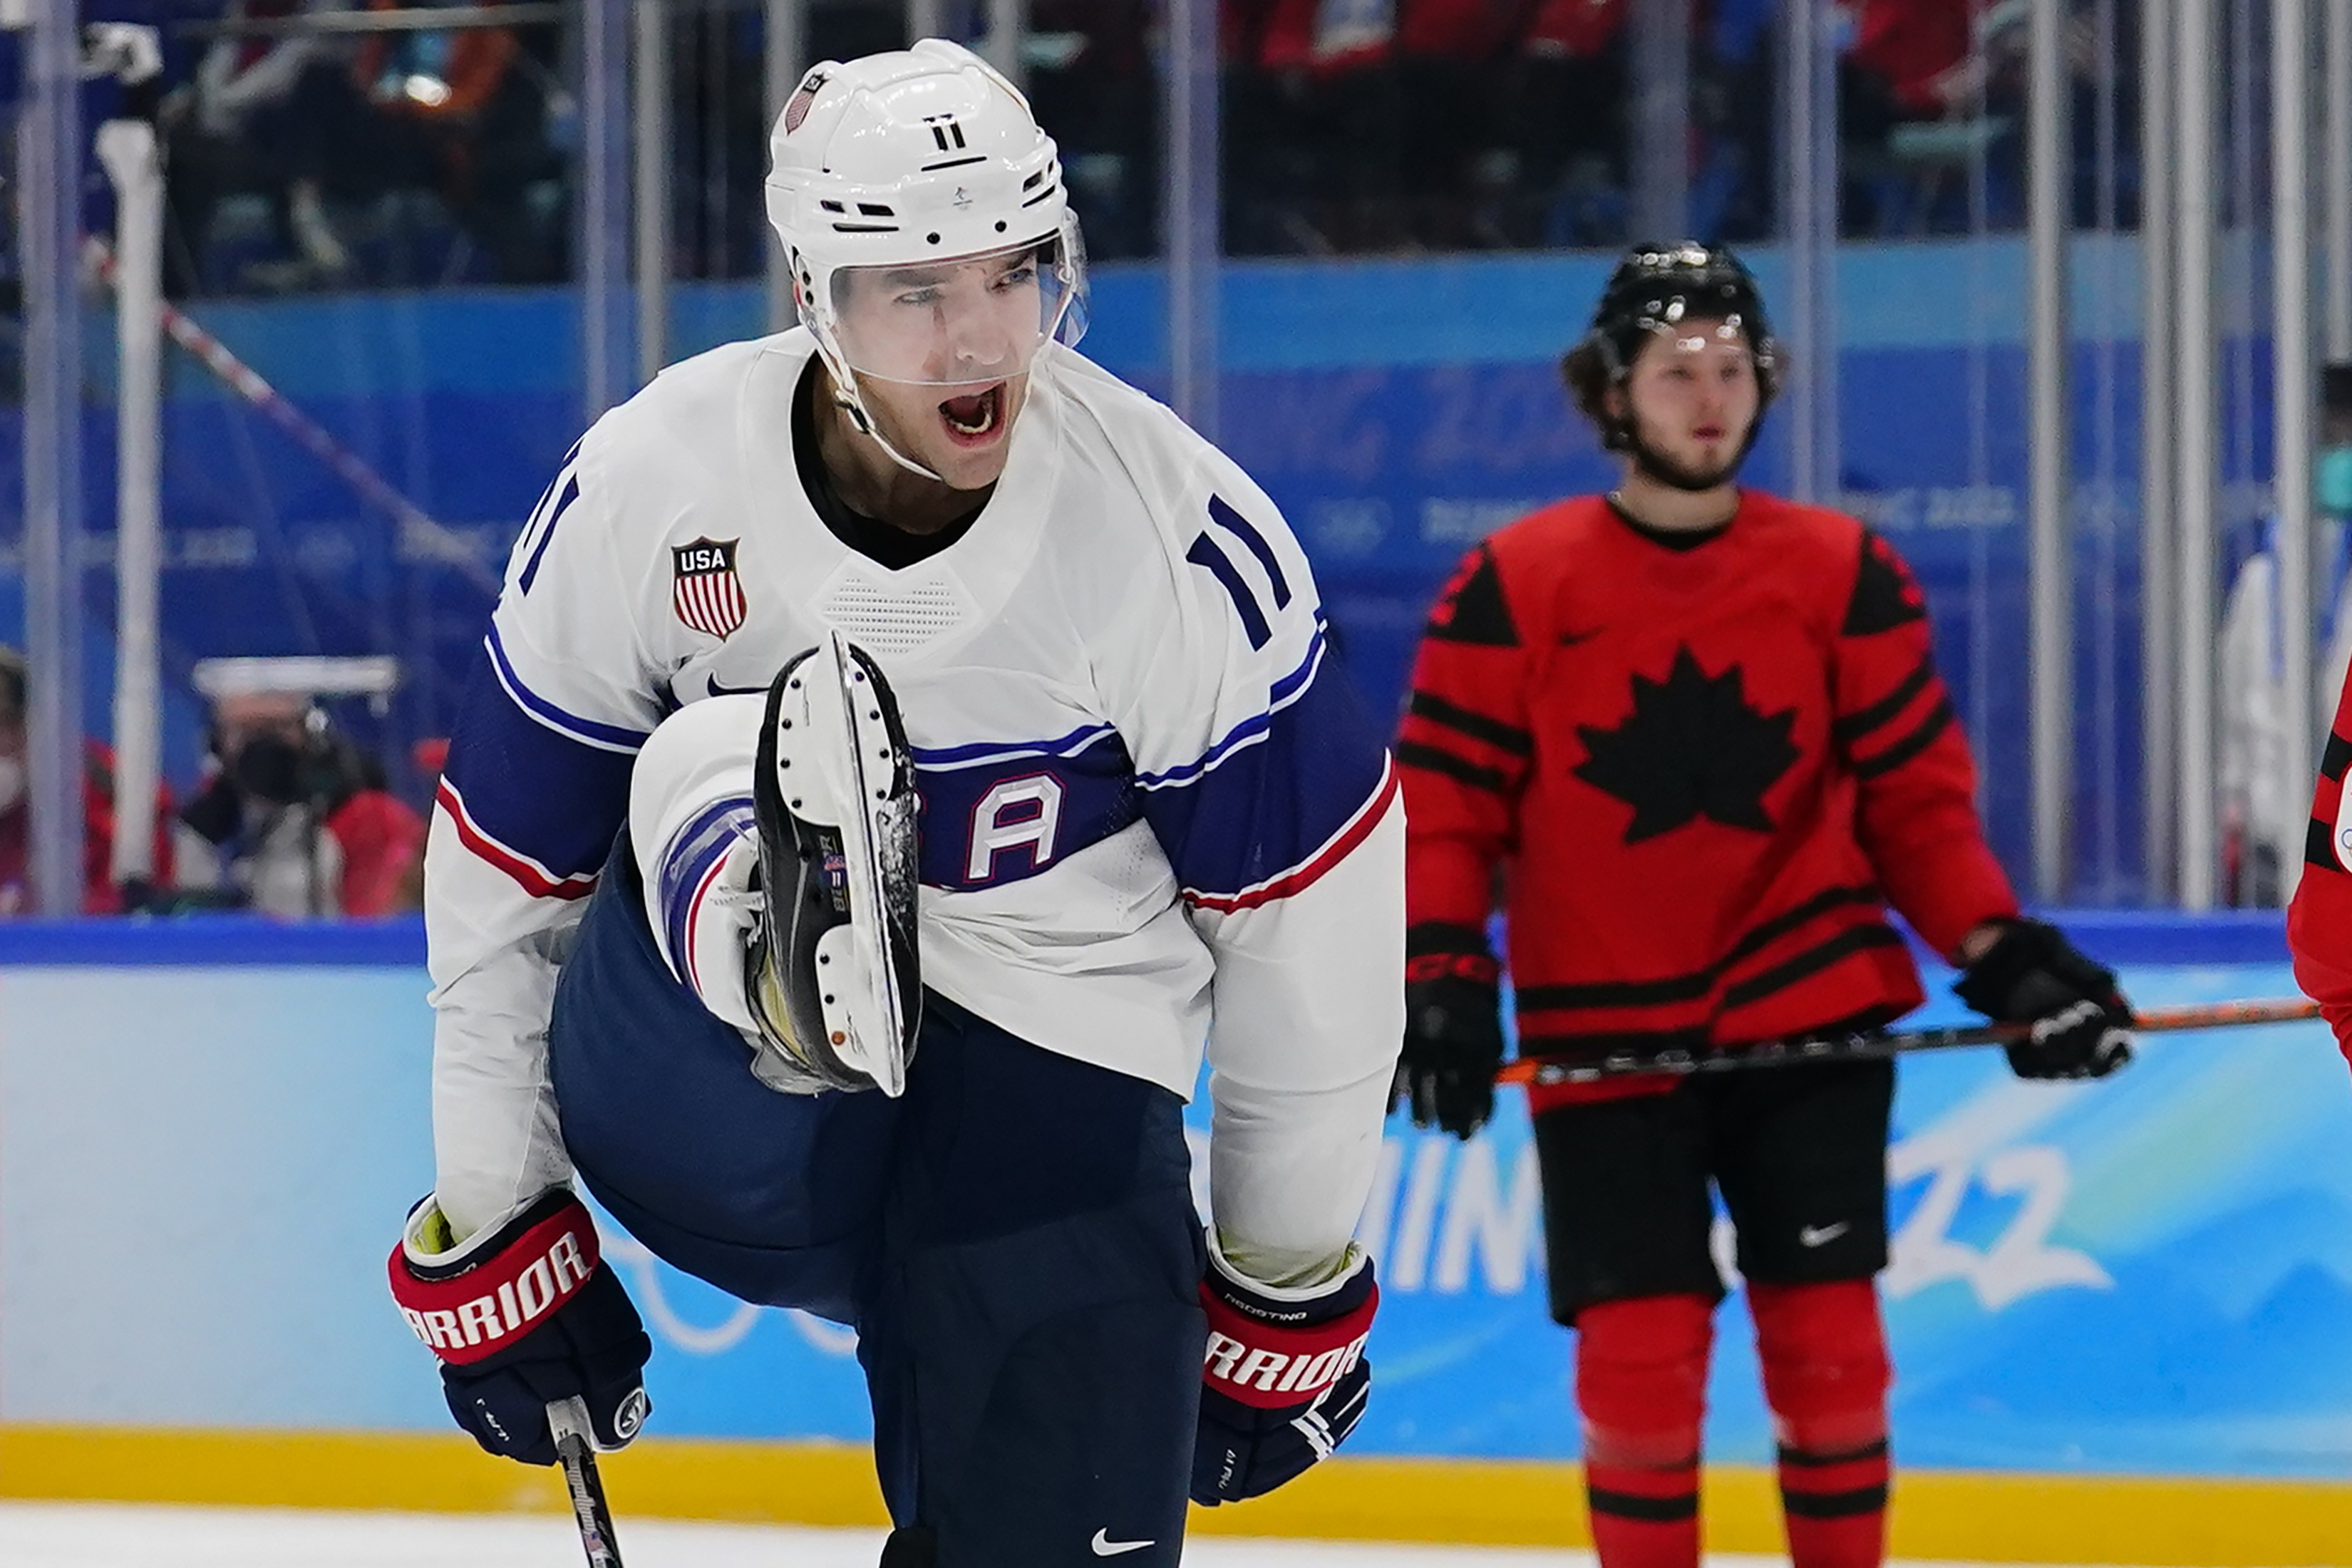 USA Men's Team Defeats Canada to Remain Undefeated in Olympics Hockey 2022 Action thumbnail